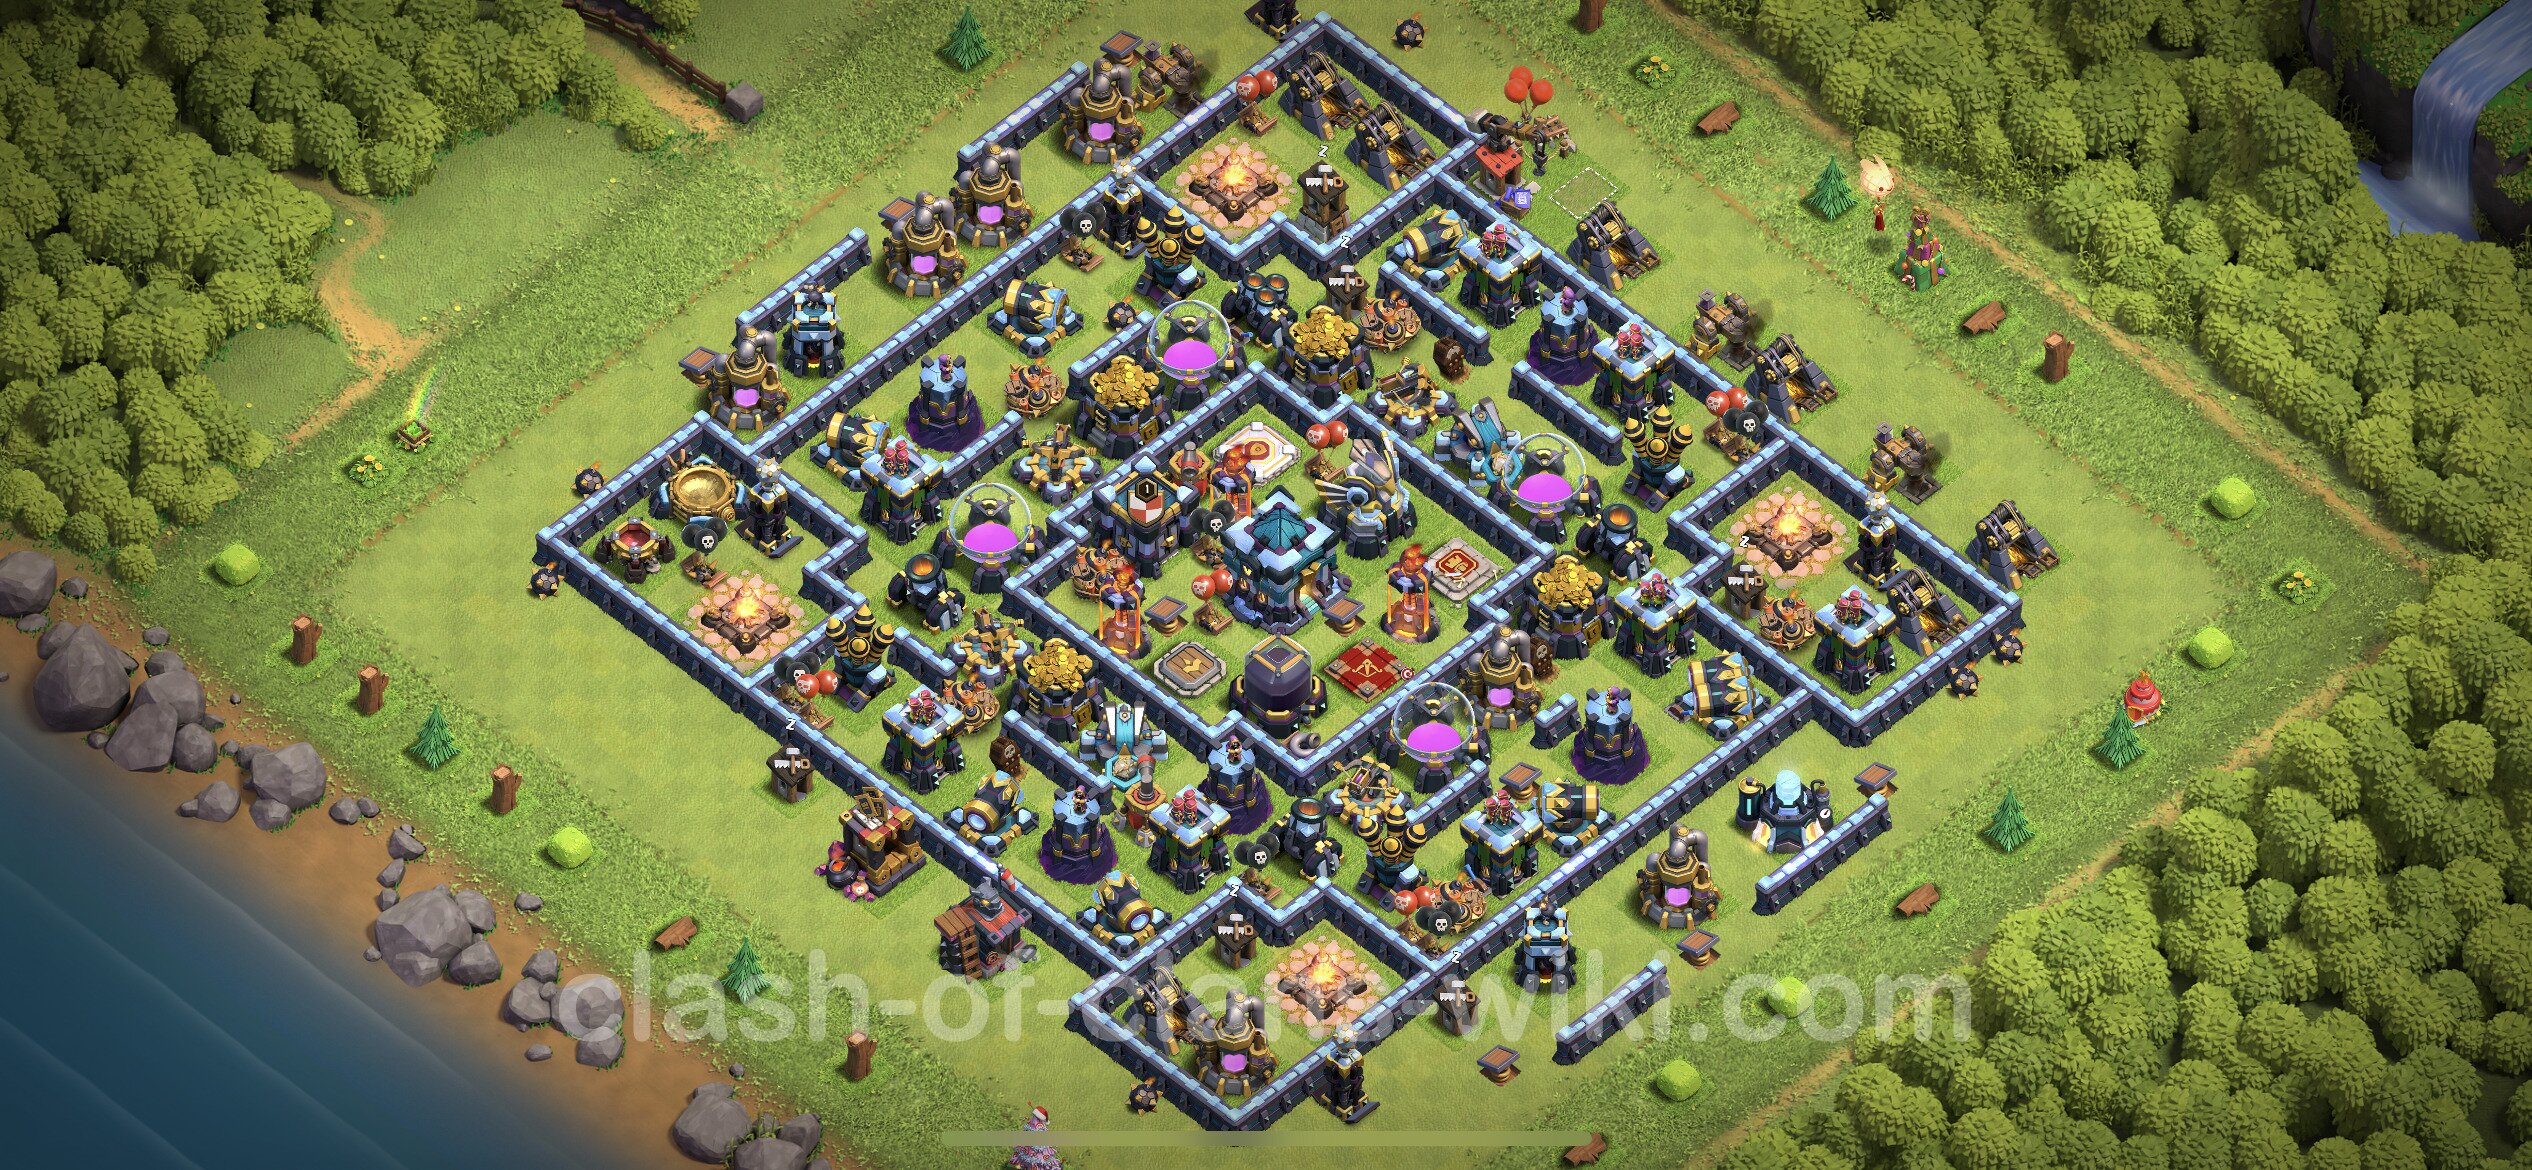 clash of clans hack version download town hall 13